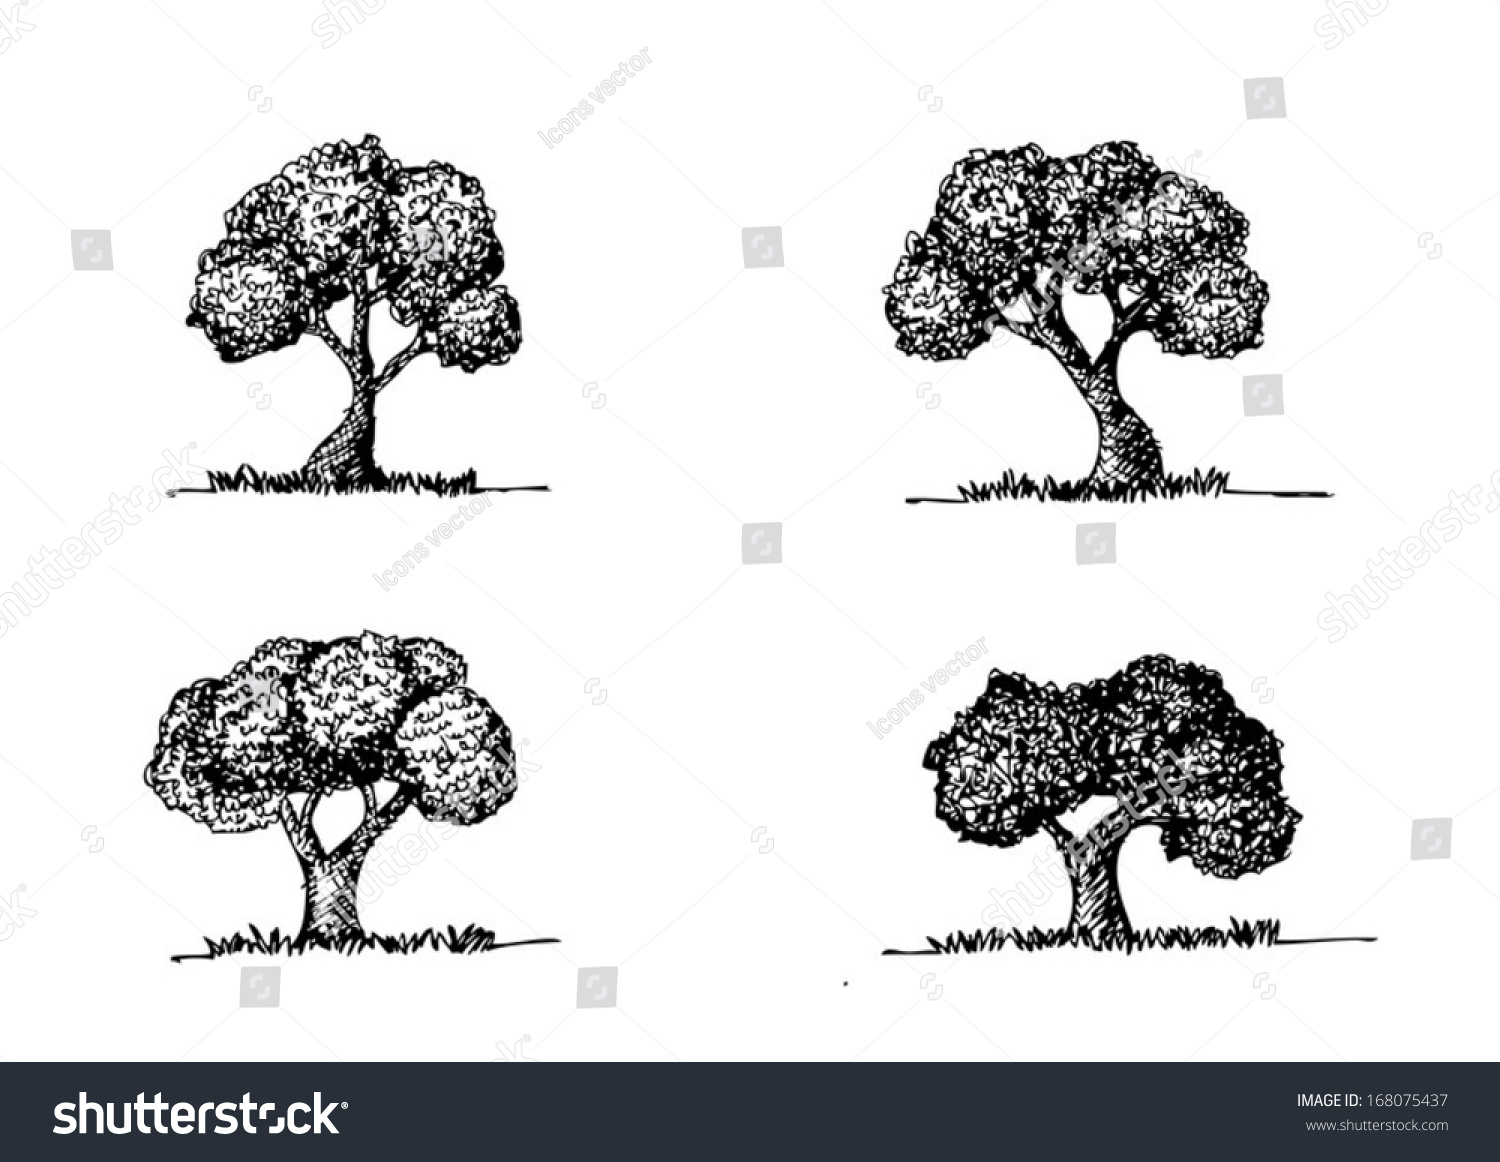 Set Of Vector Trees With Leaves - 168075437 : Shutterstock